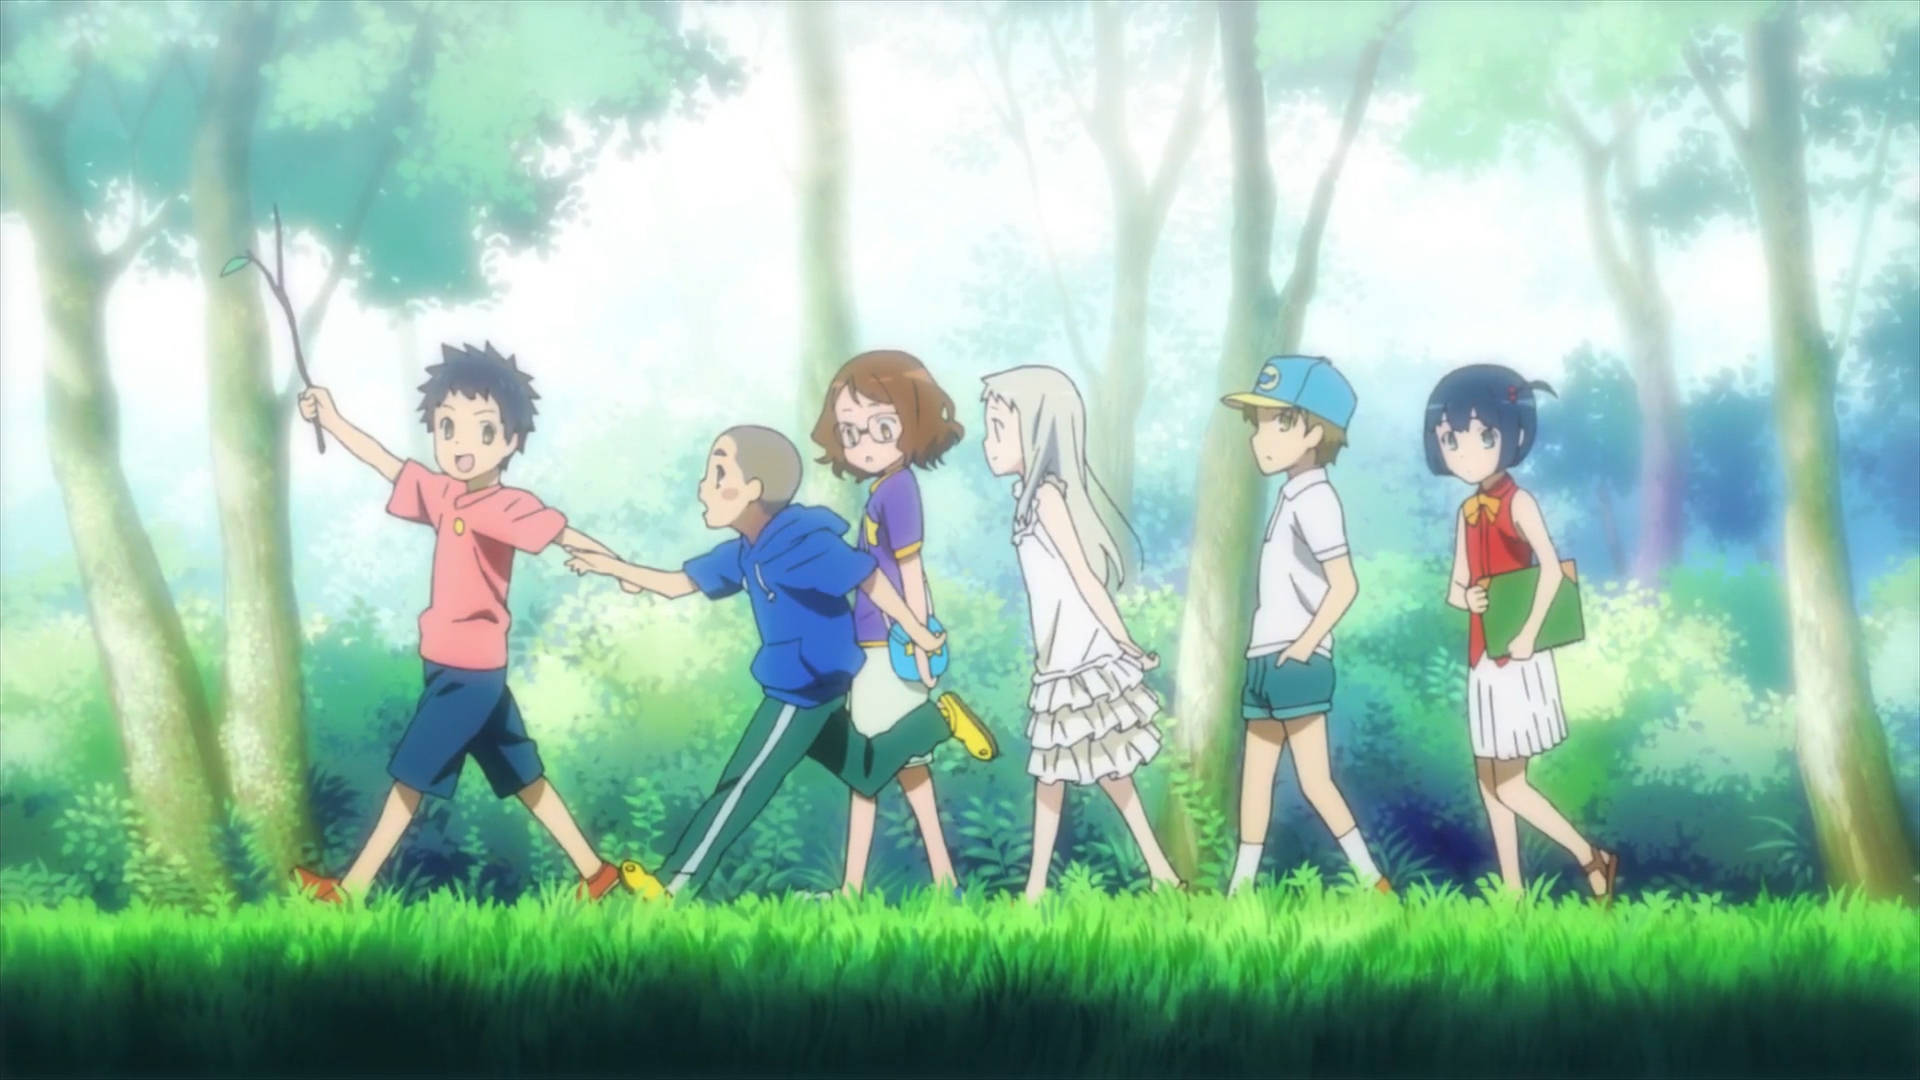 Super Peace Busters Anohana. (in Swedish: Super Peace Busters Anohana.) Wallpaper